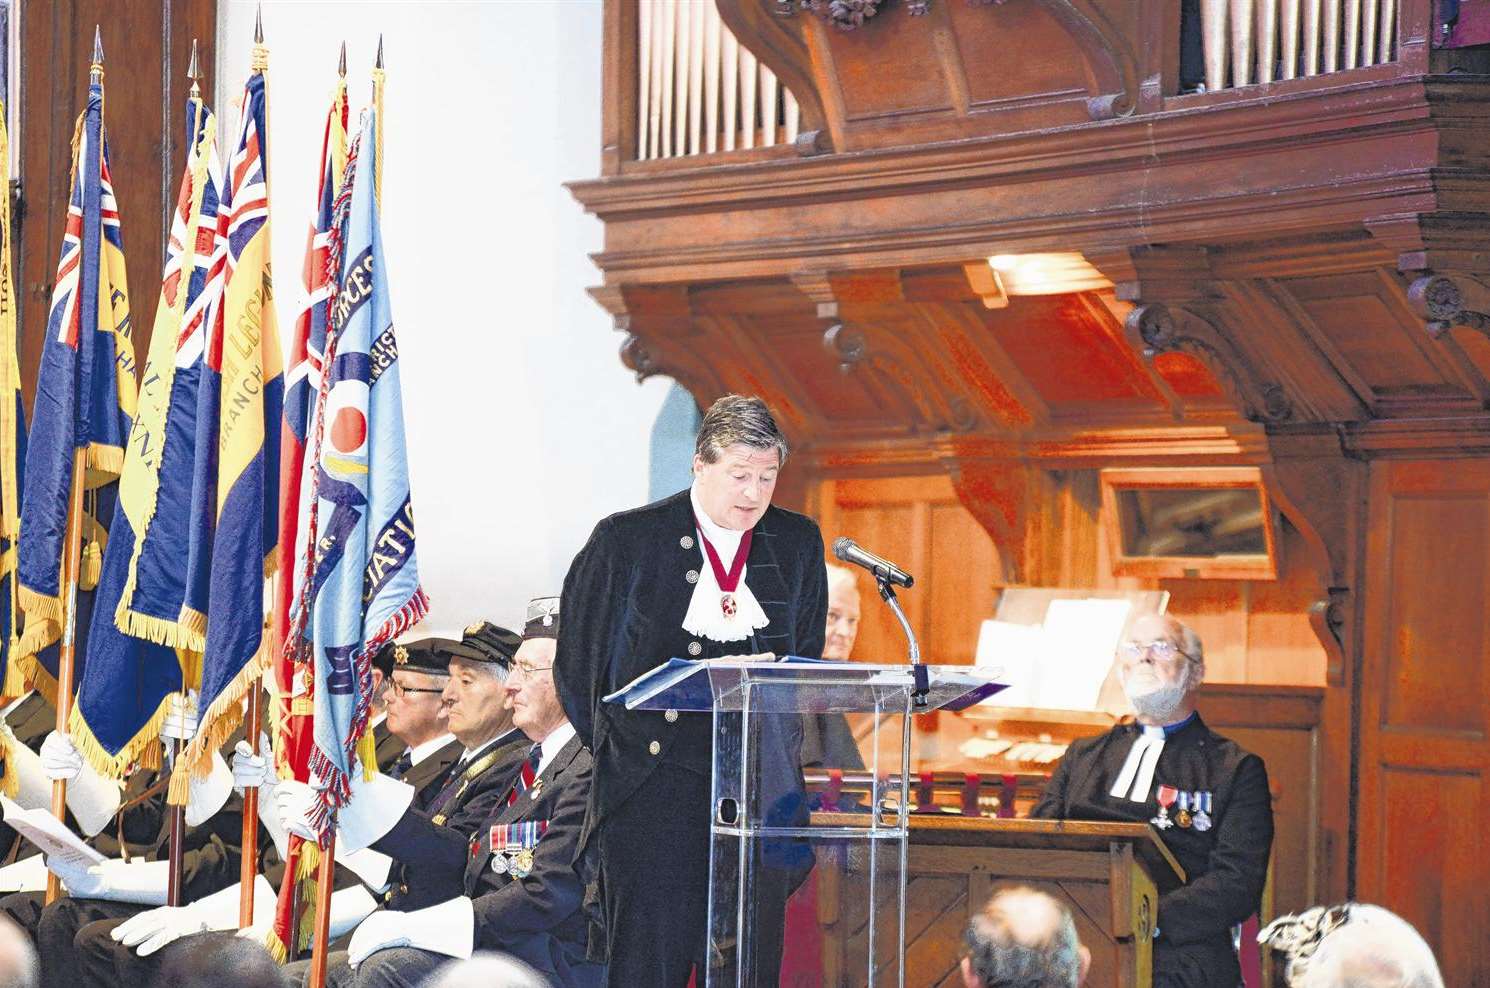 High Sheriff Hugo Fenwick addressed the congregation at the service marking the centenary of the start of the First World War.